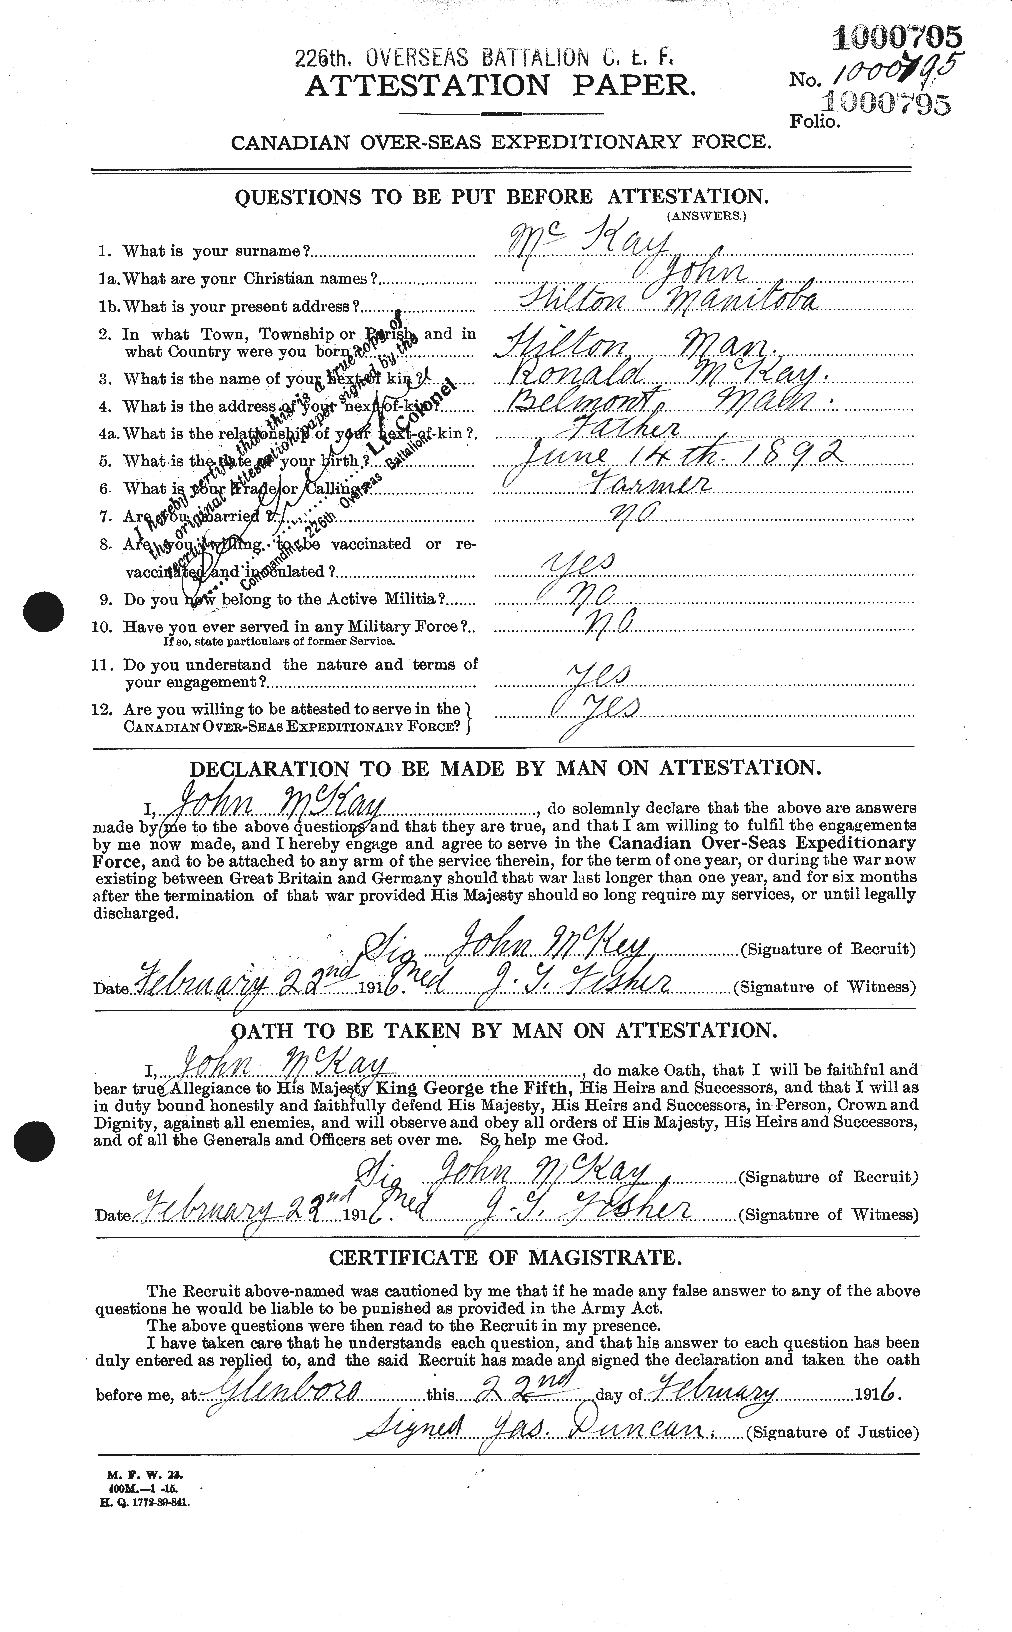 Personnel Records of the First World War - CEF 526999a